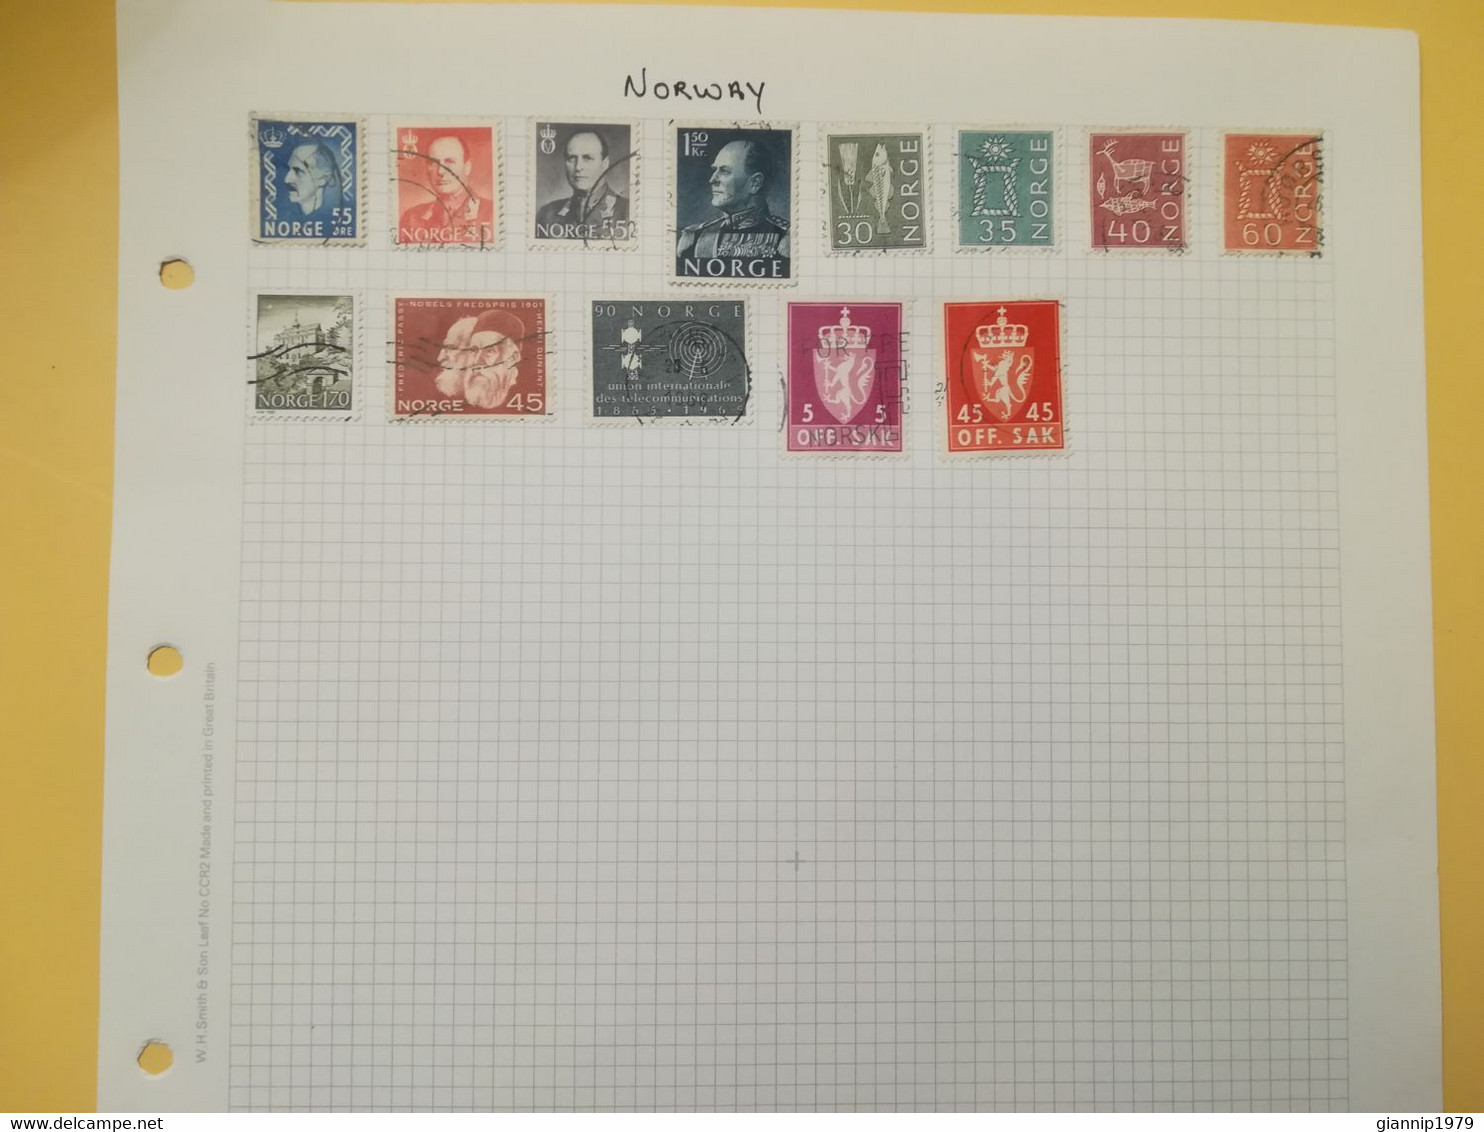 PAGINA PAGE ALBUM NORVEGIA NORGE NORWAY 1951 ATTACCATI PAGE WITH STAMPS COLLEZIONI LOTTO LOT LOTS - Collections